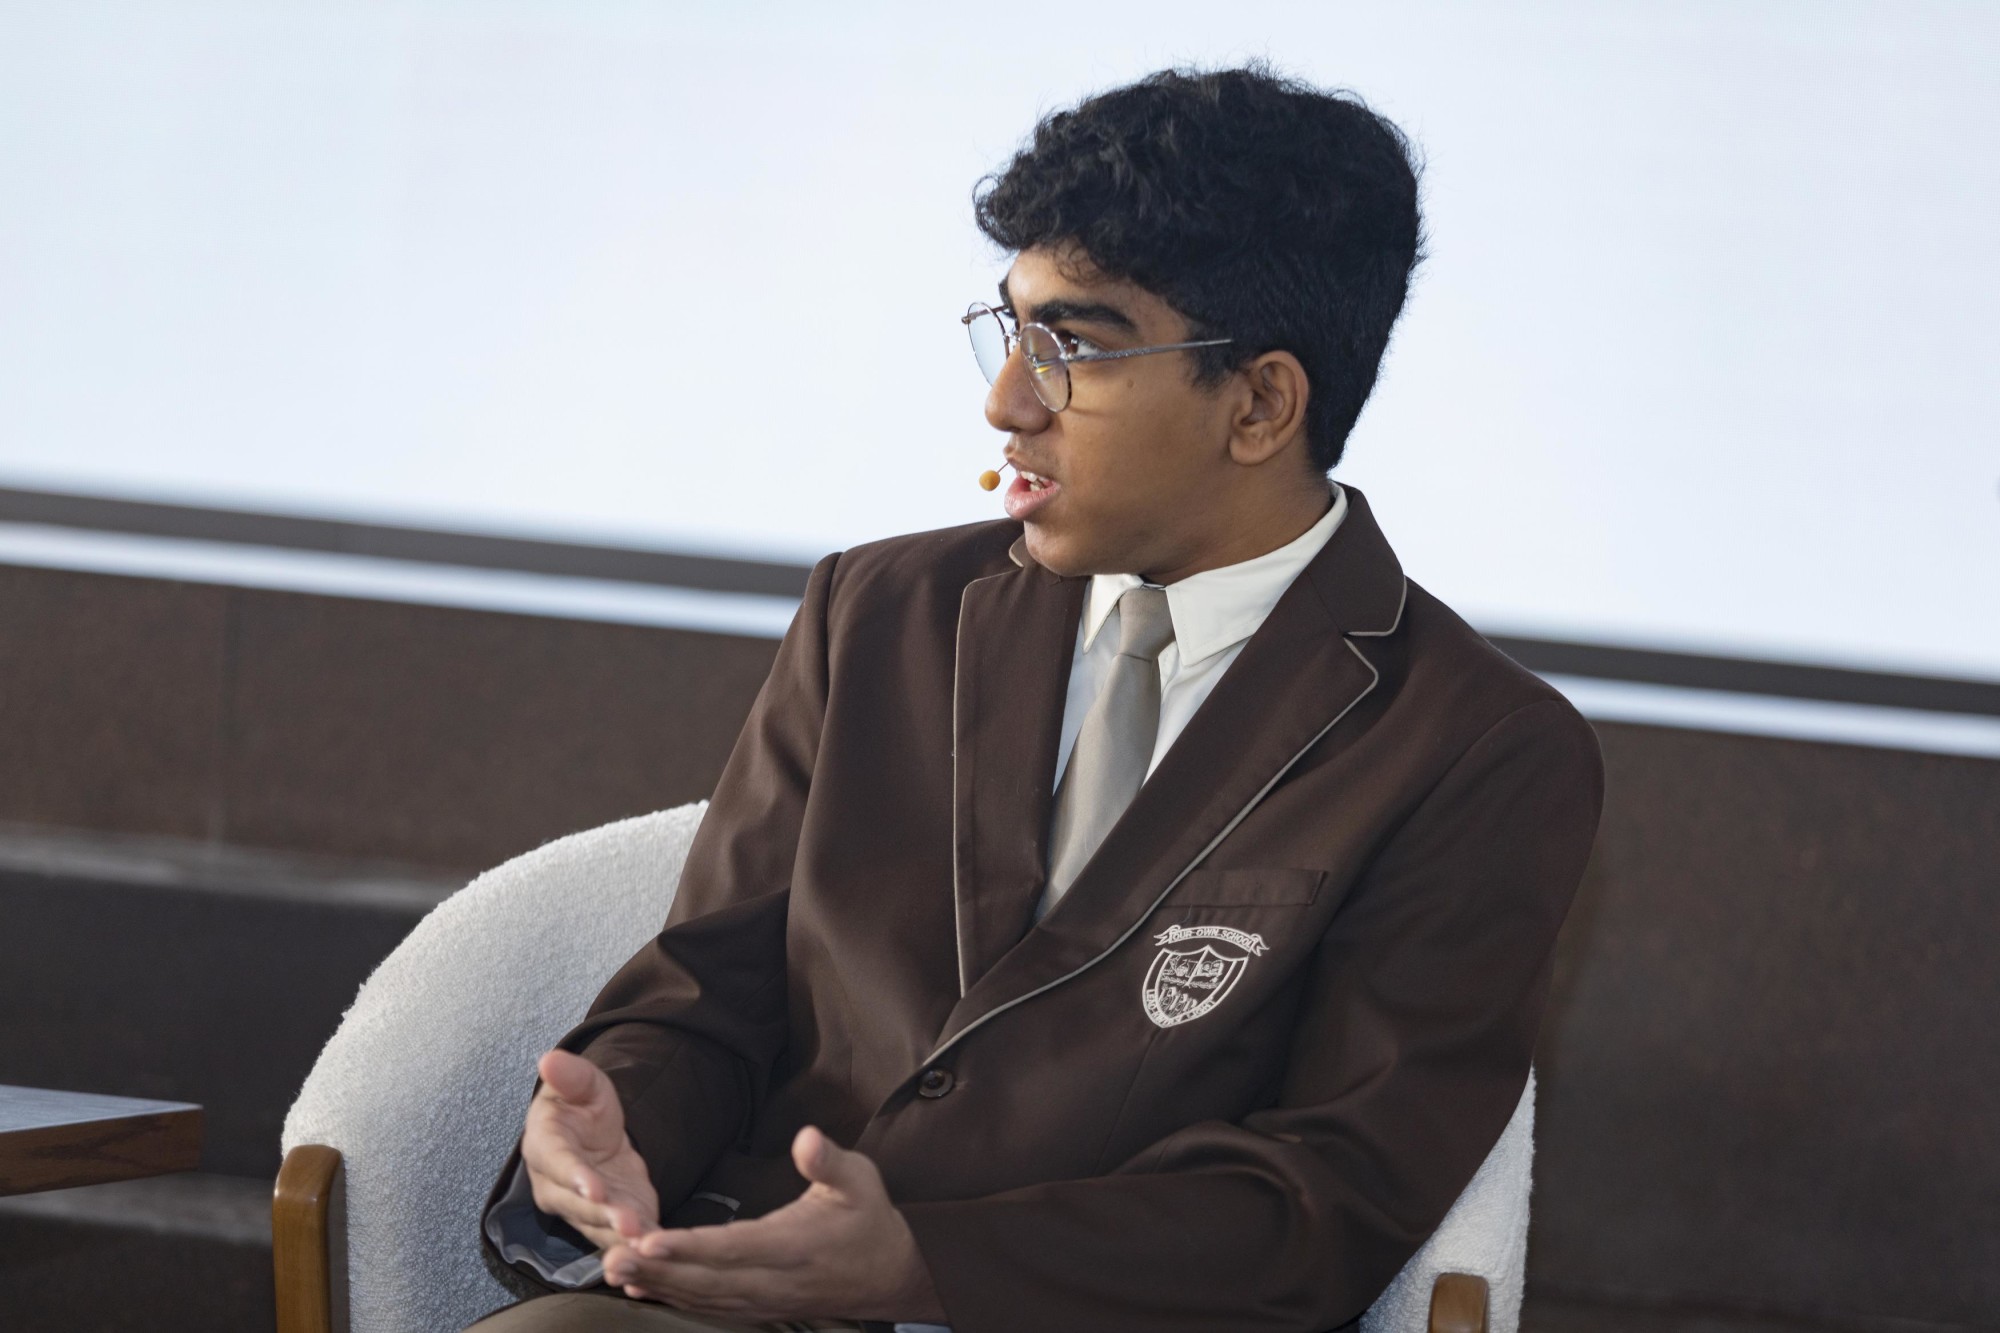 Achal Mohandas, GEMS Our Own English High School - Sharjah Boys’, Sharhjah during Next Gen World Majlis A Good Place to Work Balancing personal and professional lives at the Portugal Pavilion m44505